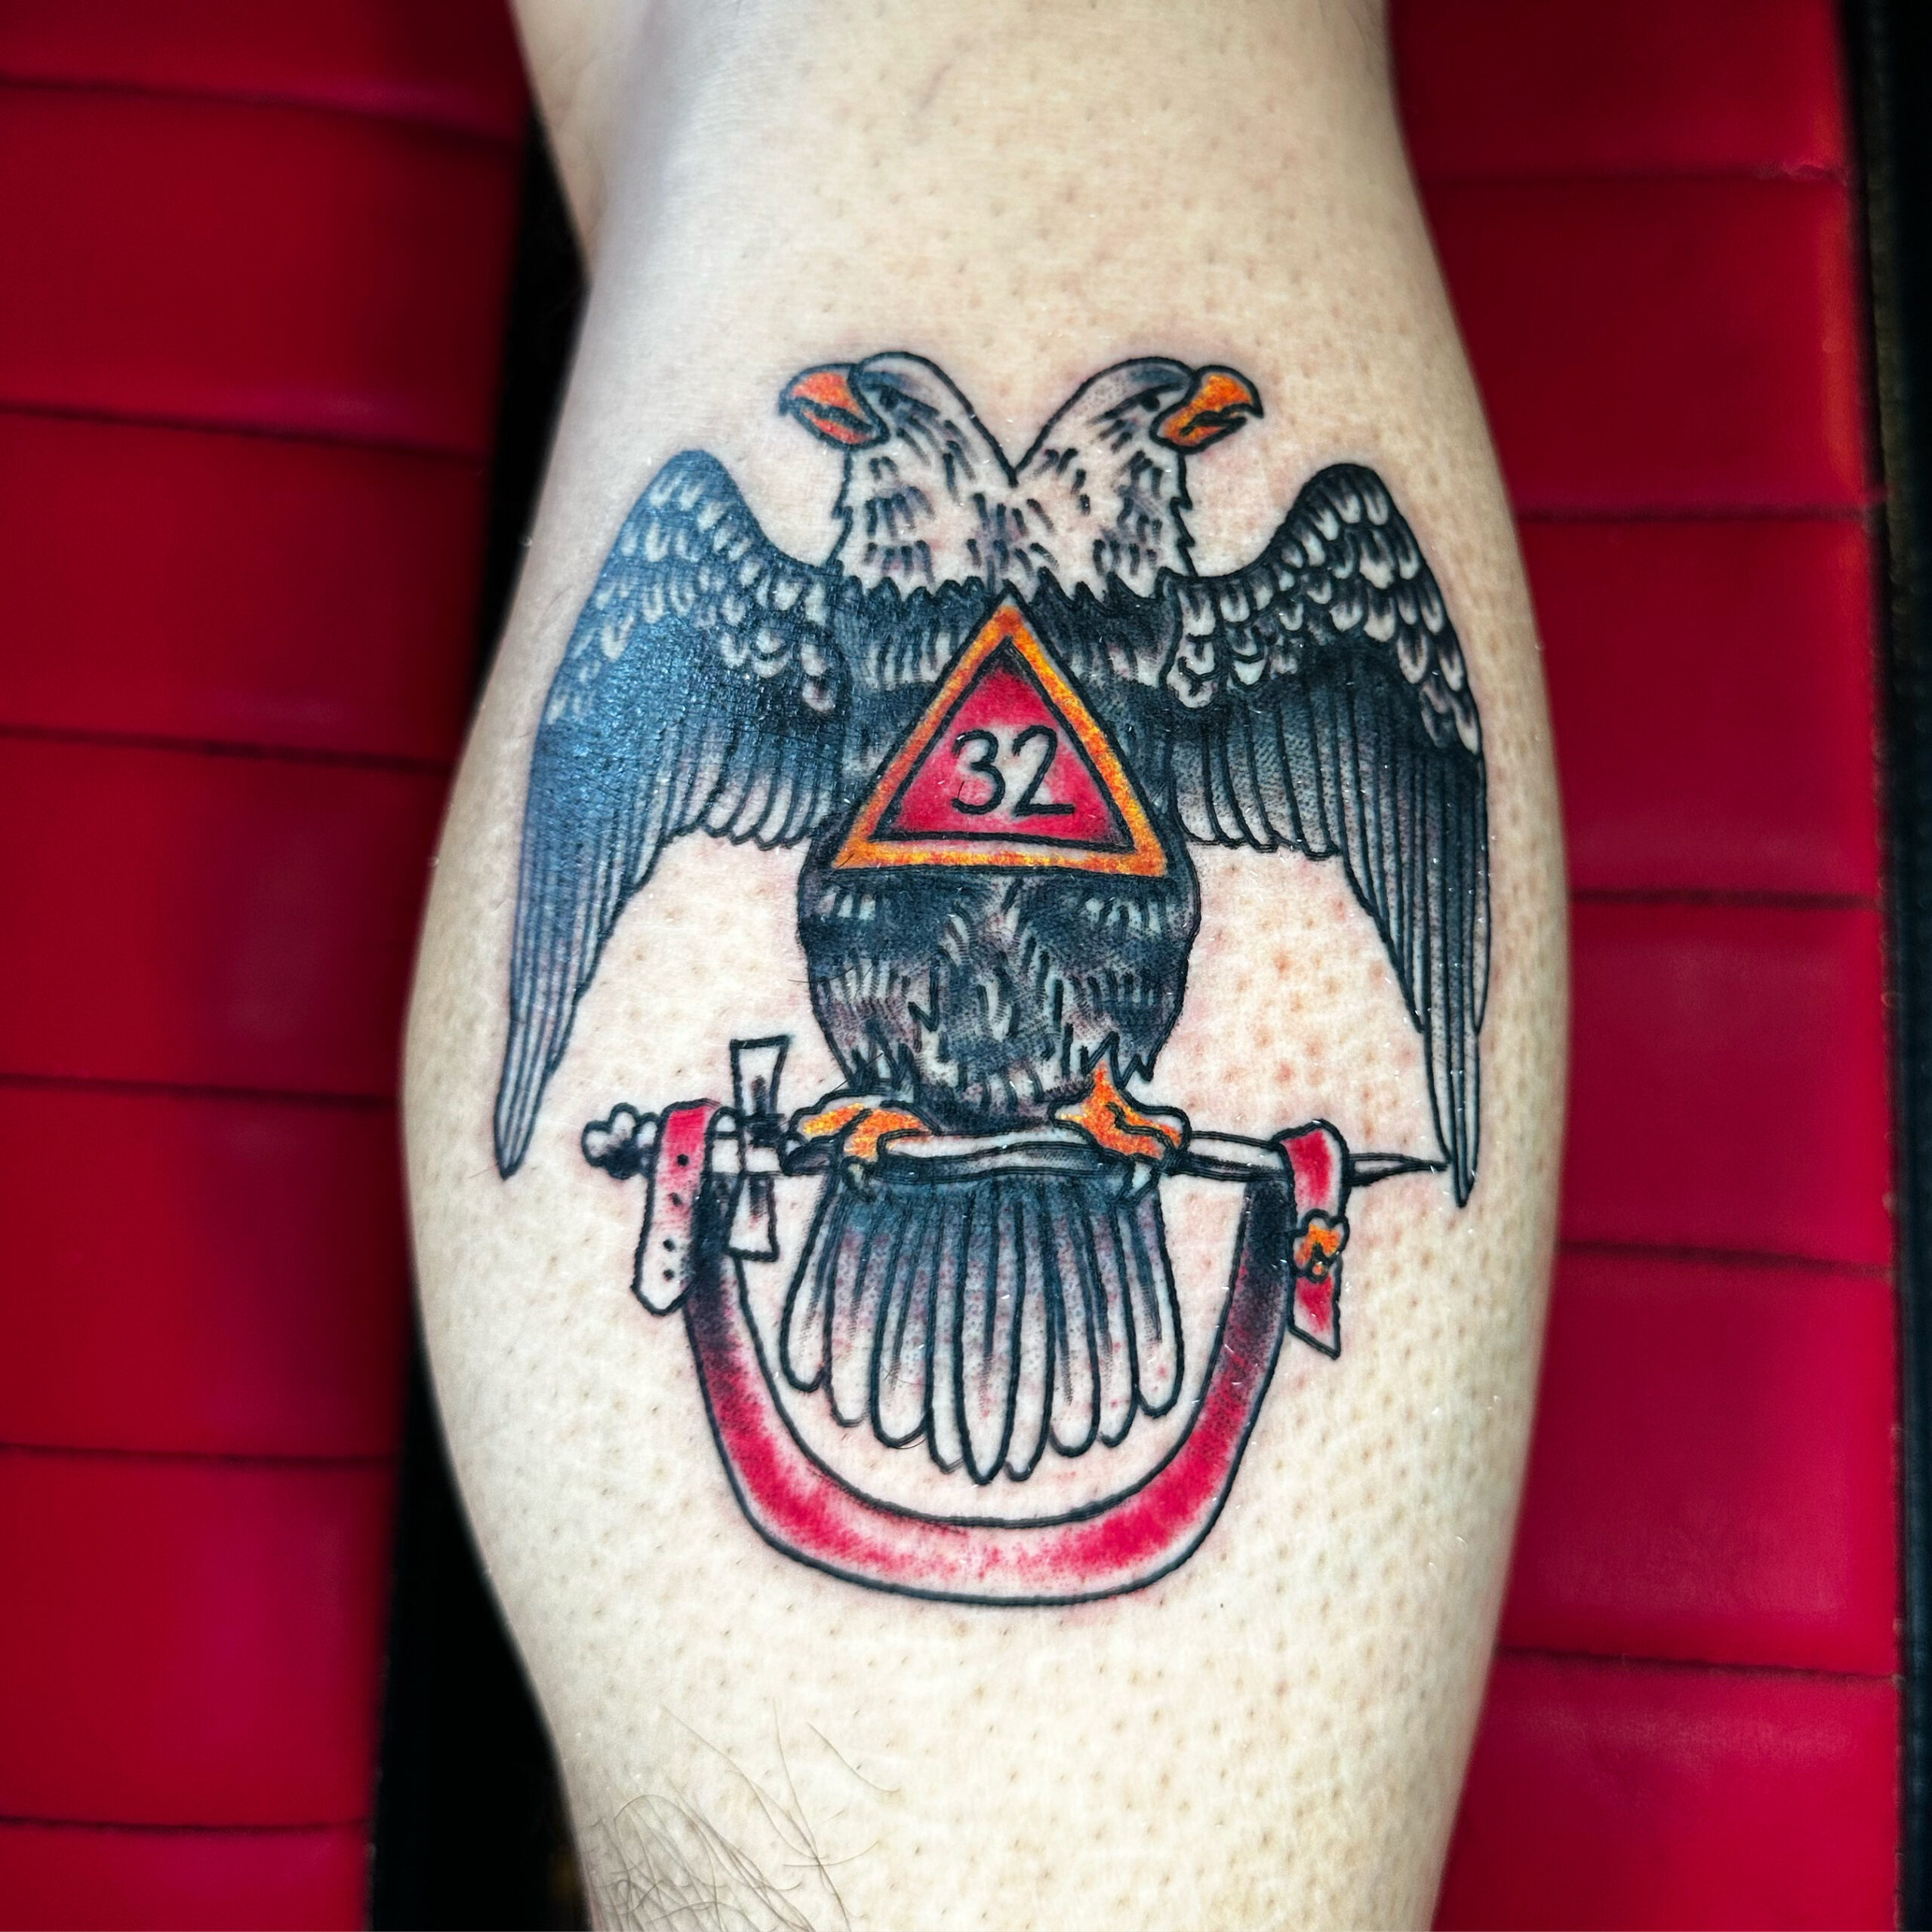 Tattoo of an eagle and a sword